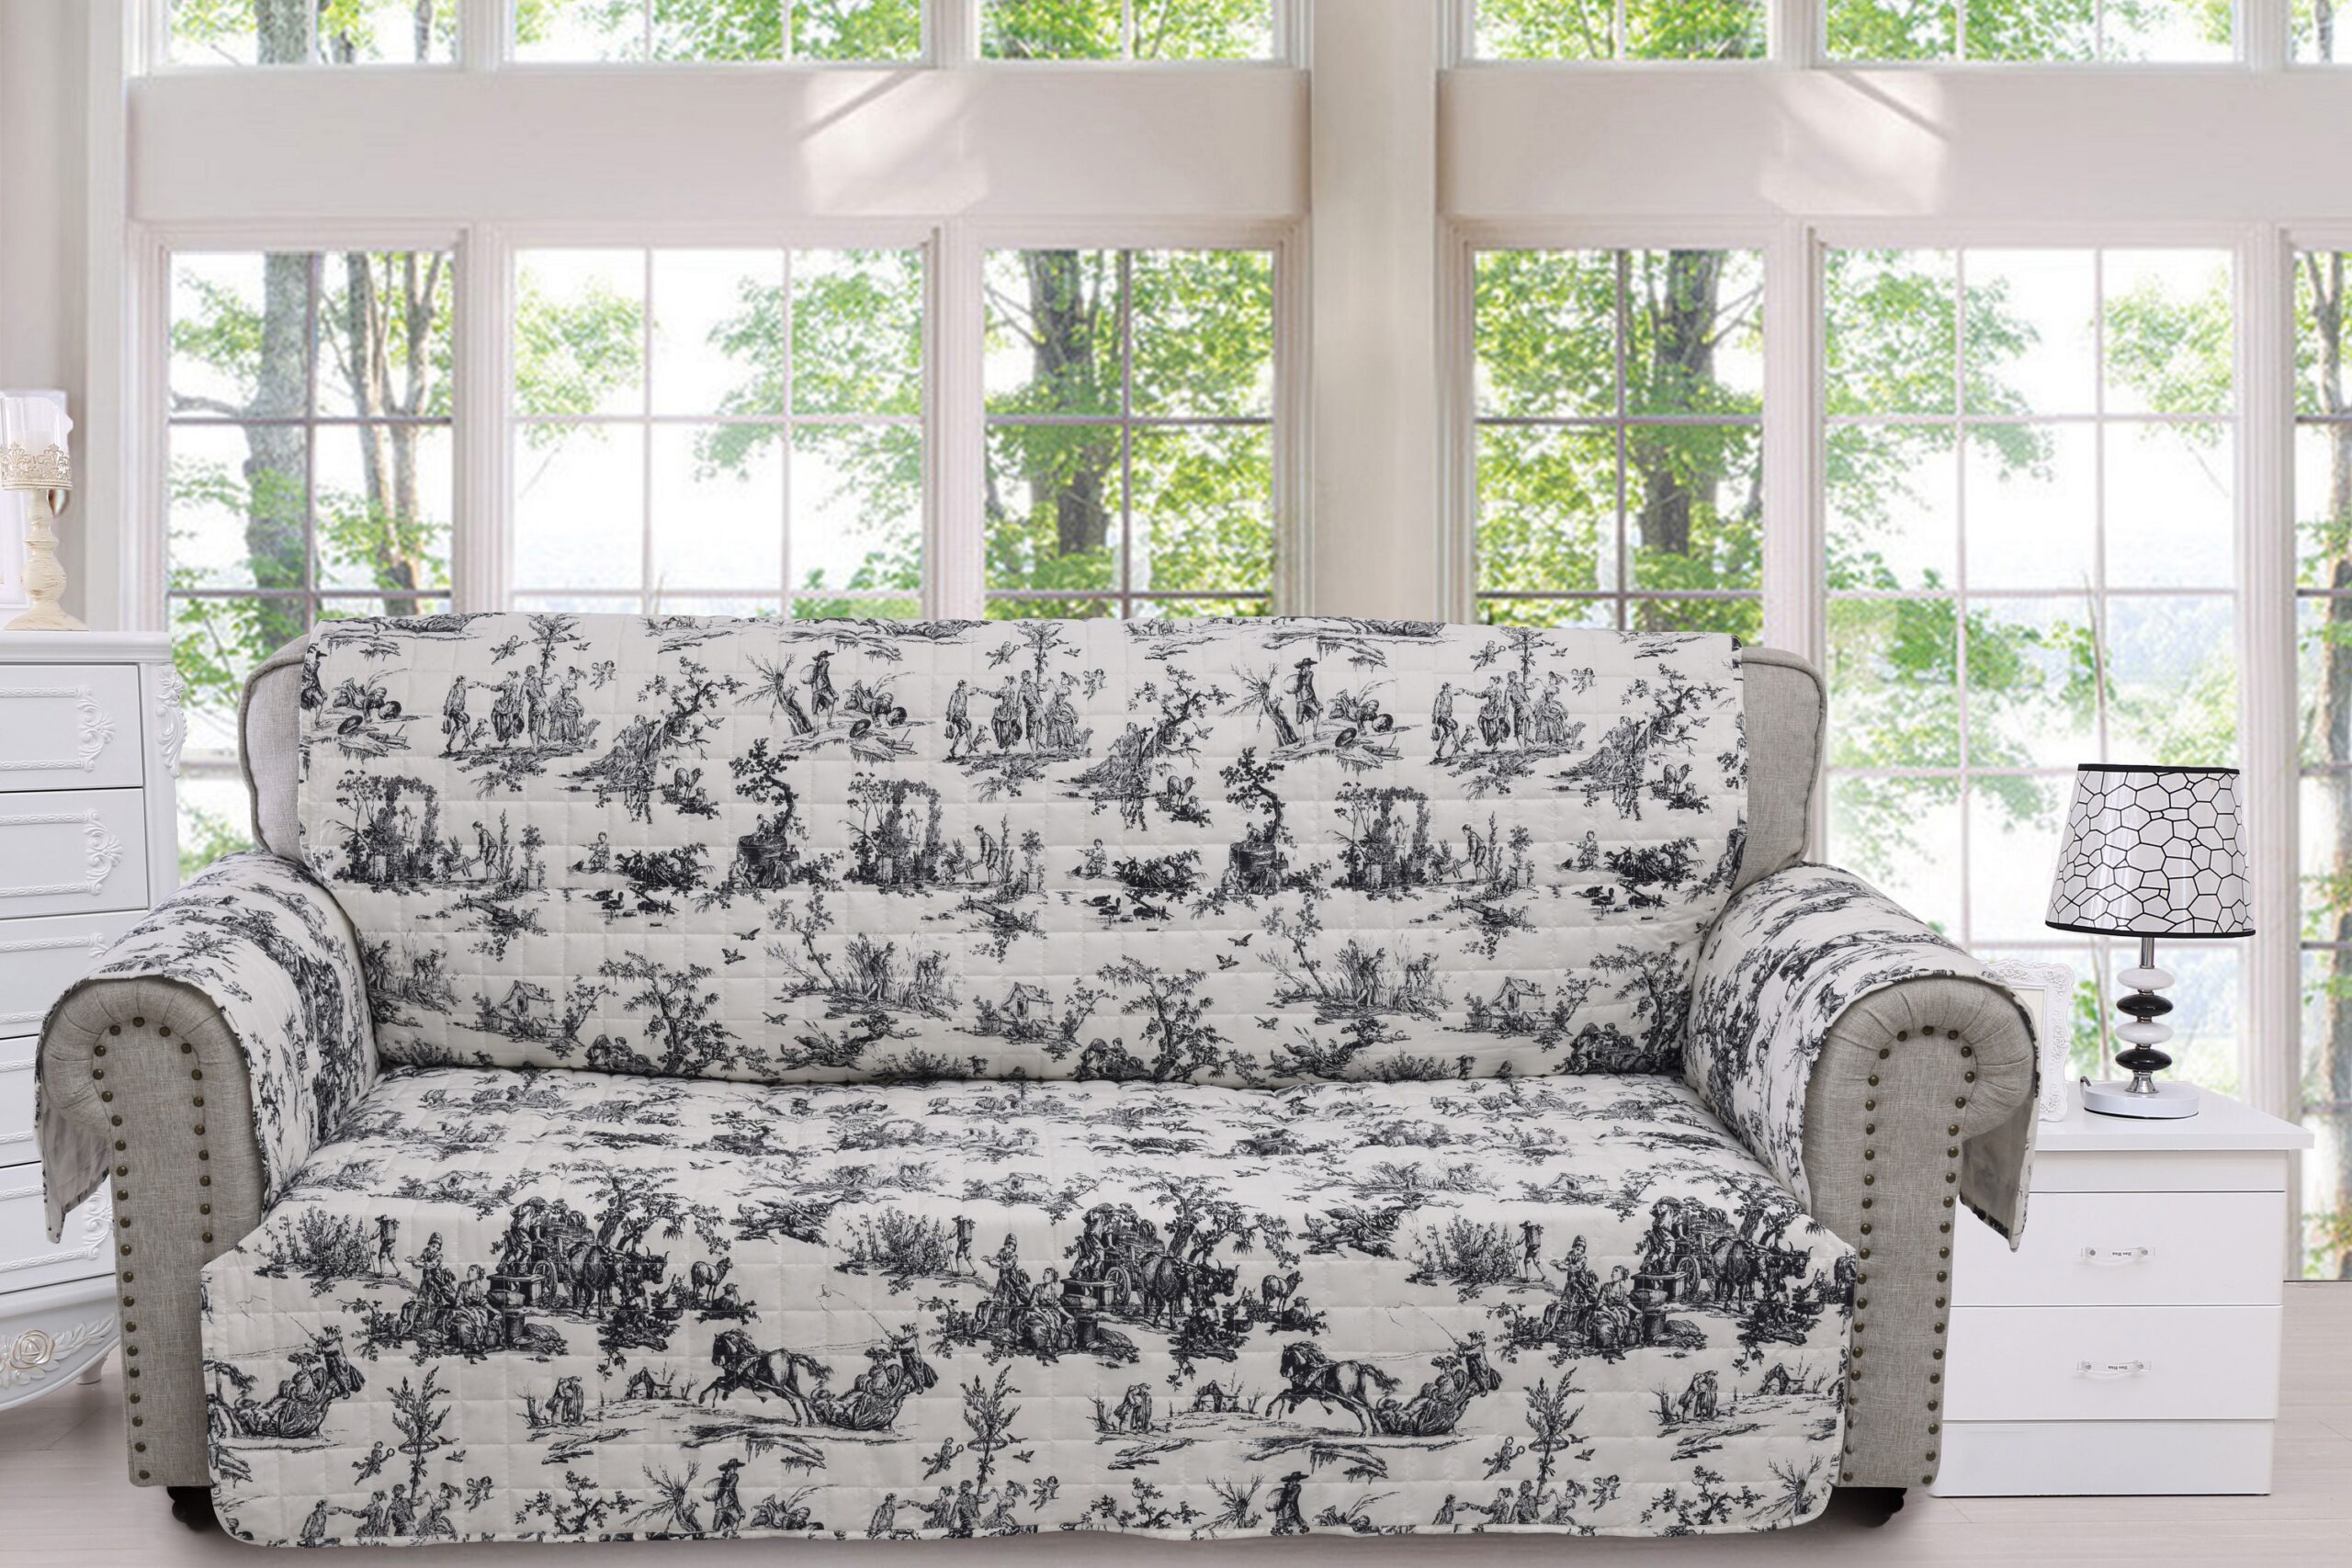 https://www.greenlandhomefashions.com/wp-content/uploads/2021/05/Classic-Toile-Black-Farmhouse-Sofa-Country-Living-French-Prairie-1-scaled.jpg